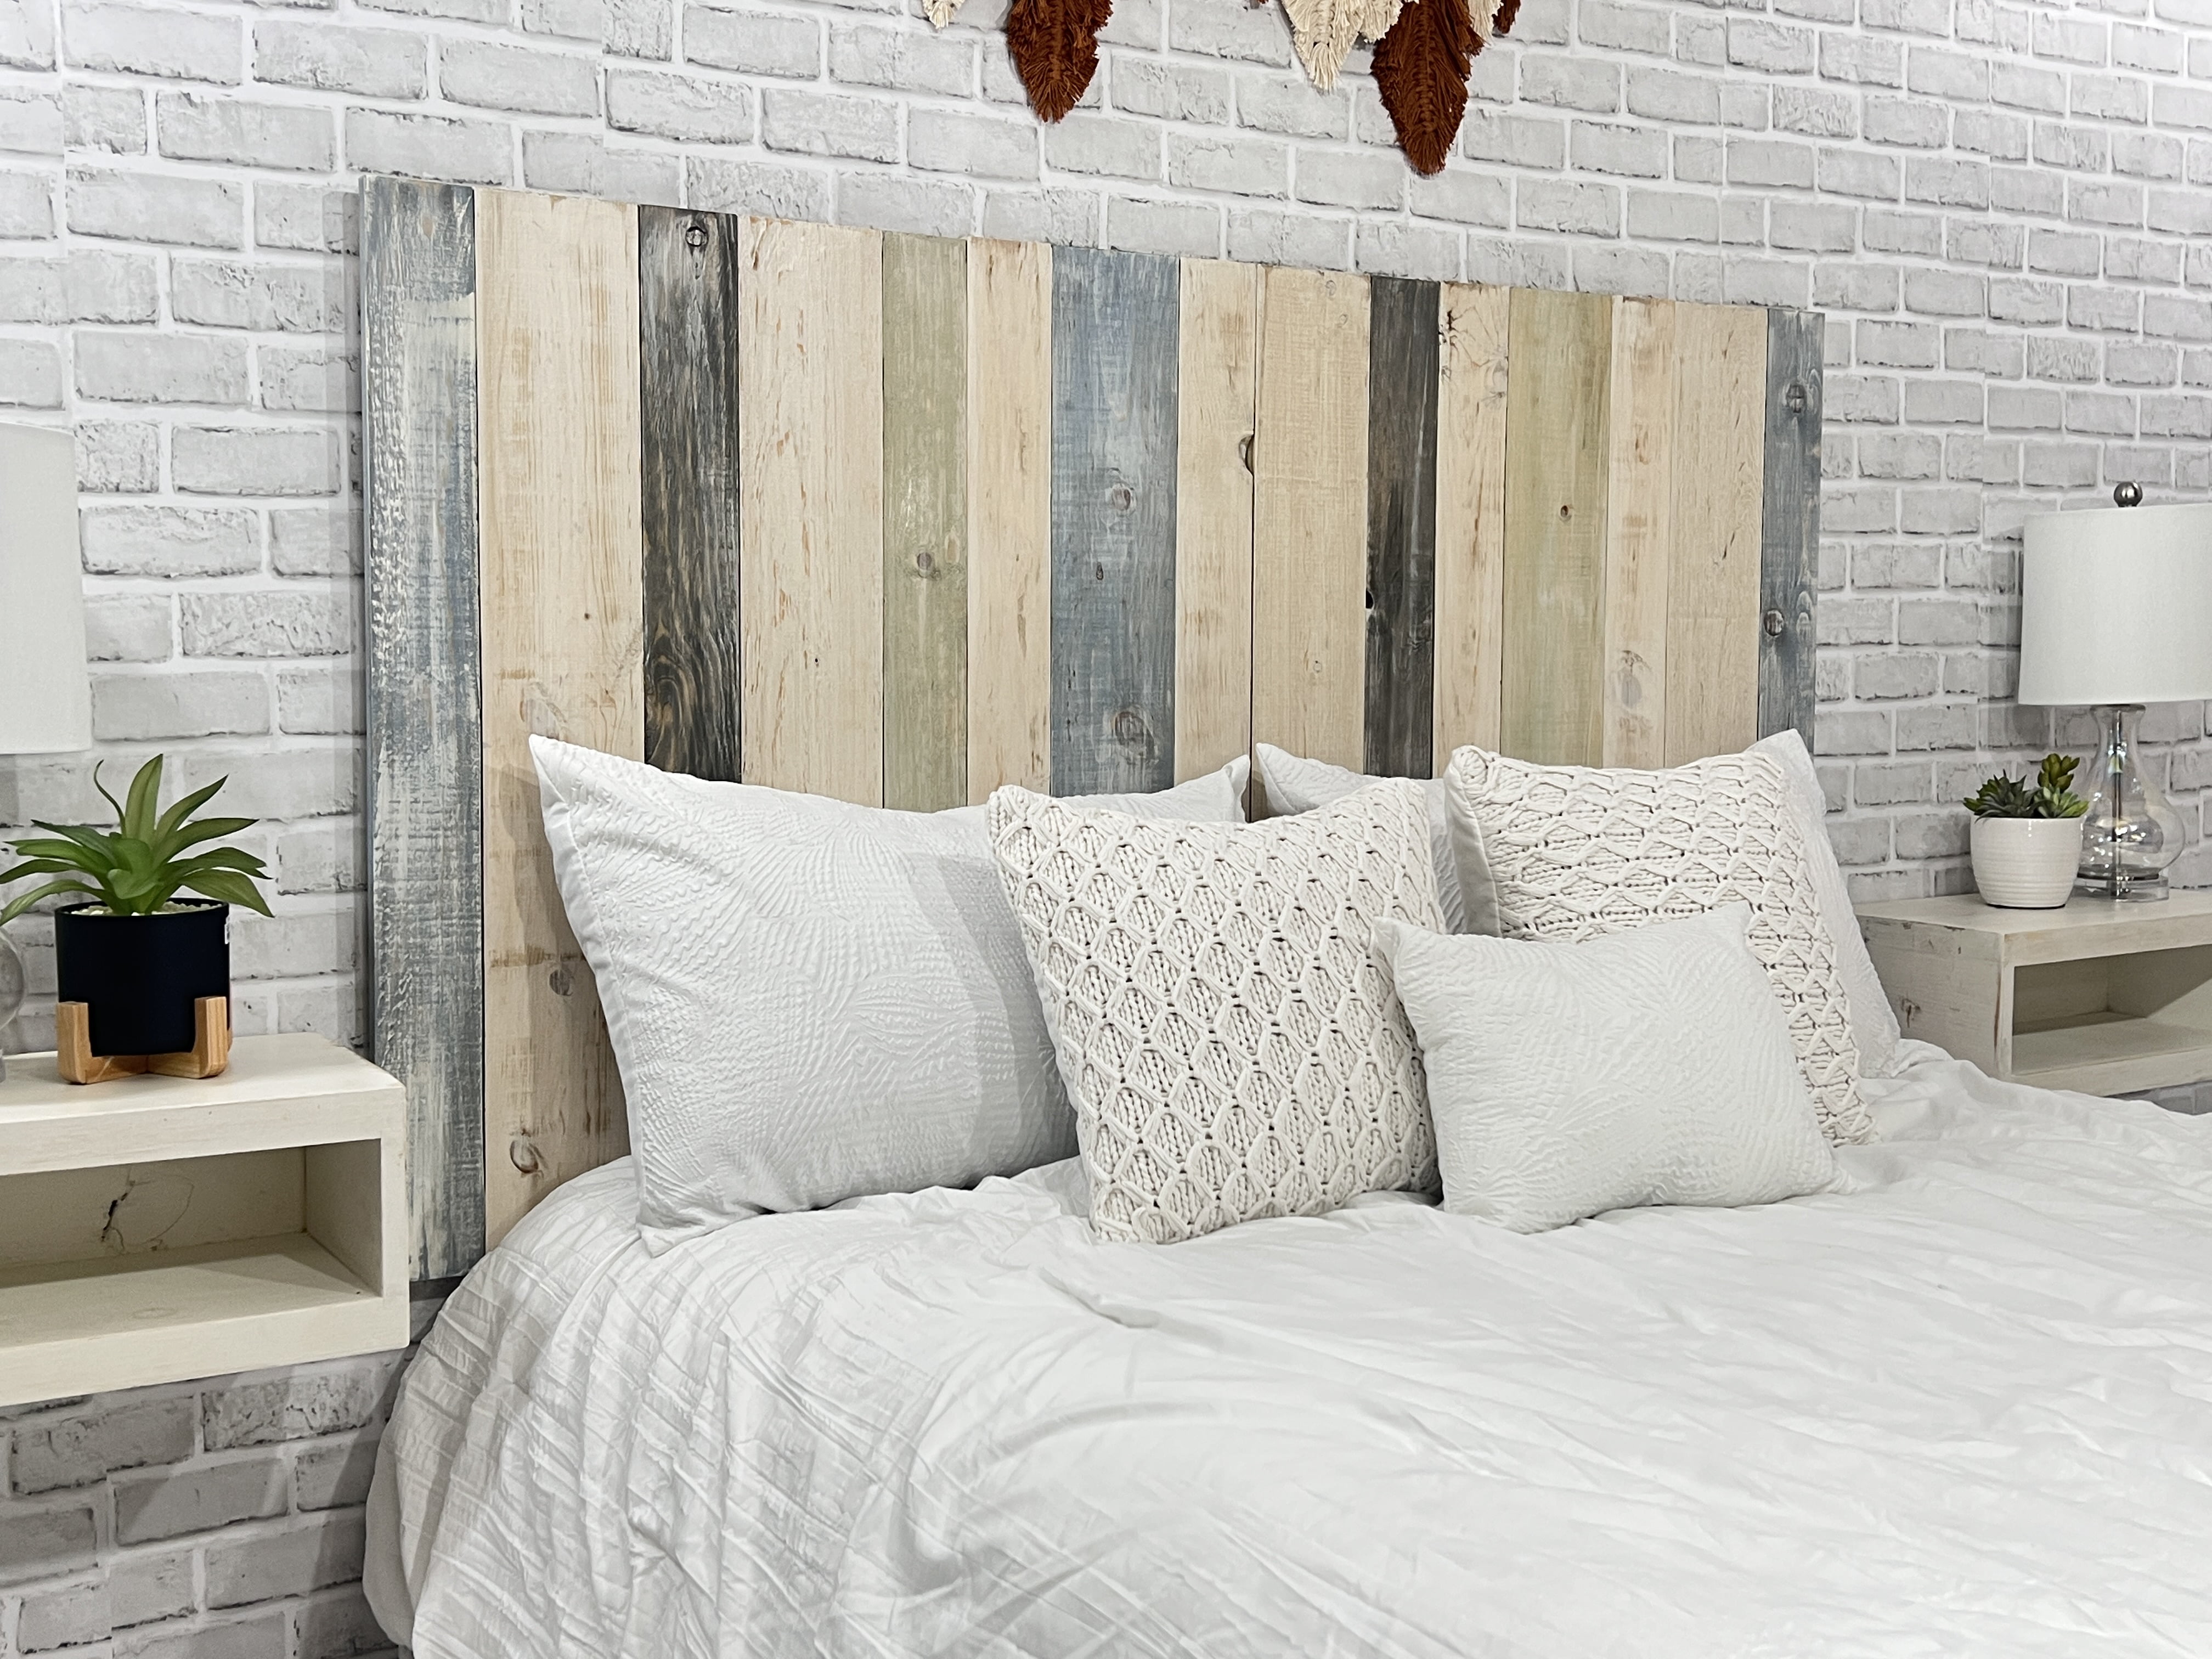 Barn Walls Handcrafted Floating Hanger, White Carved Headboard Full